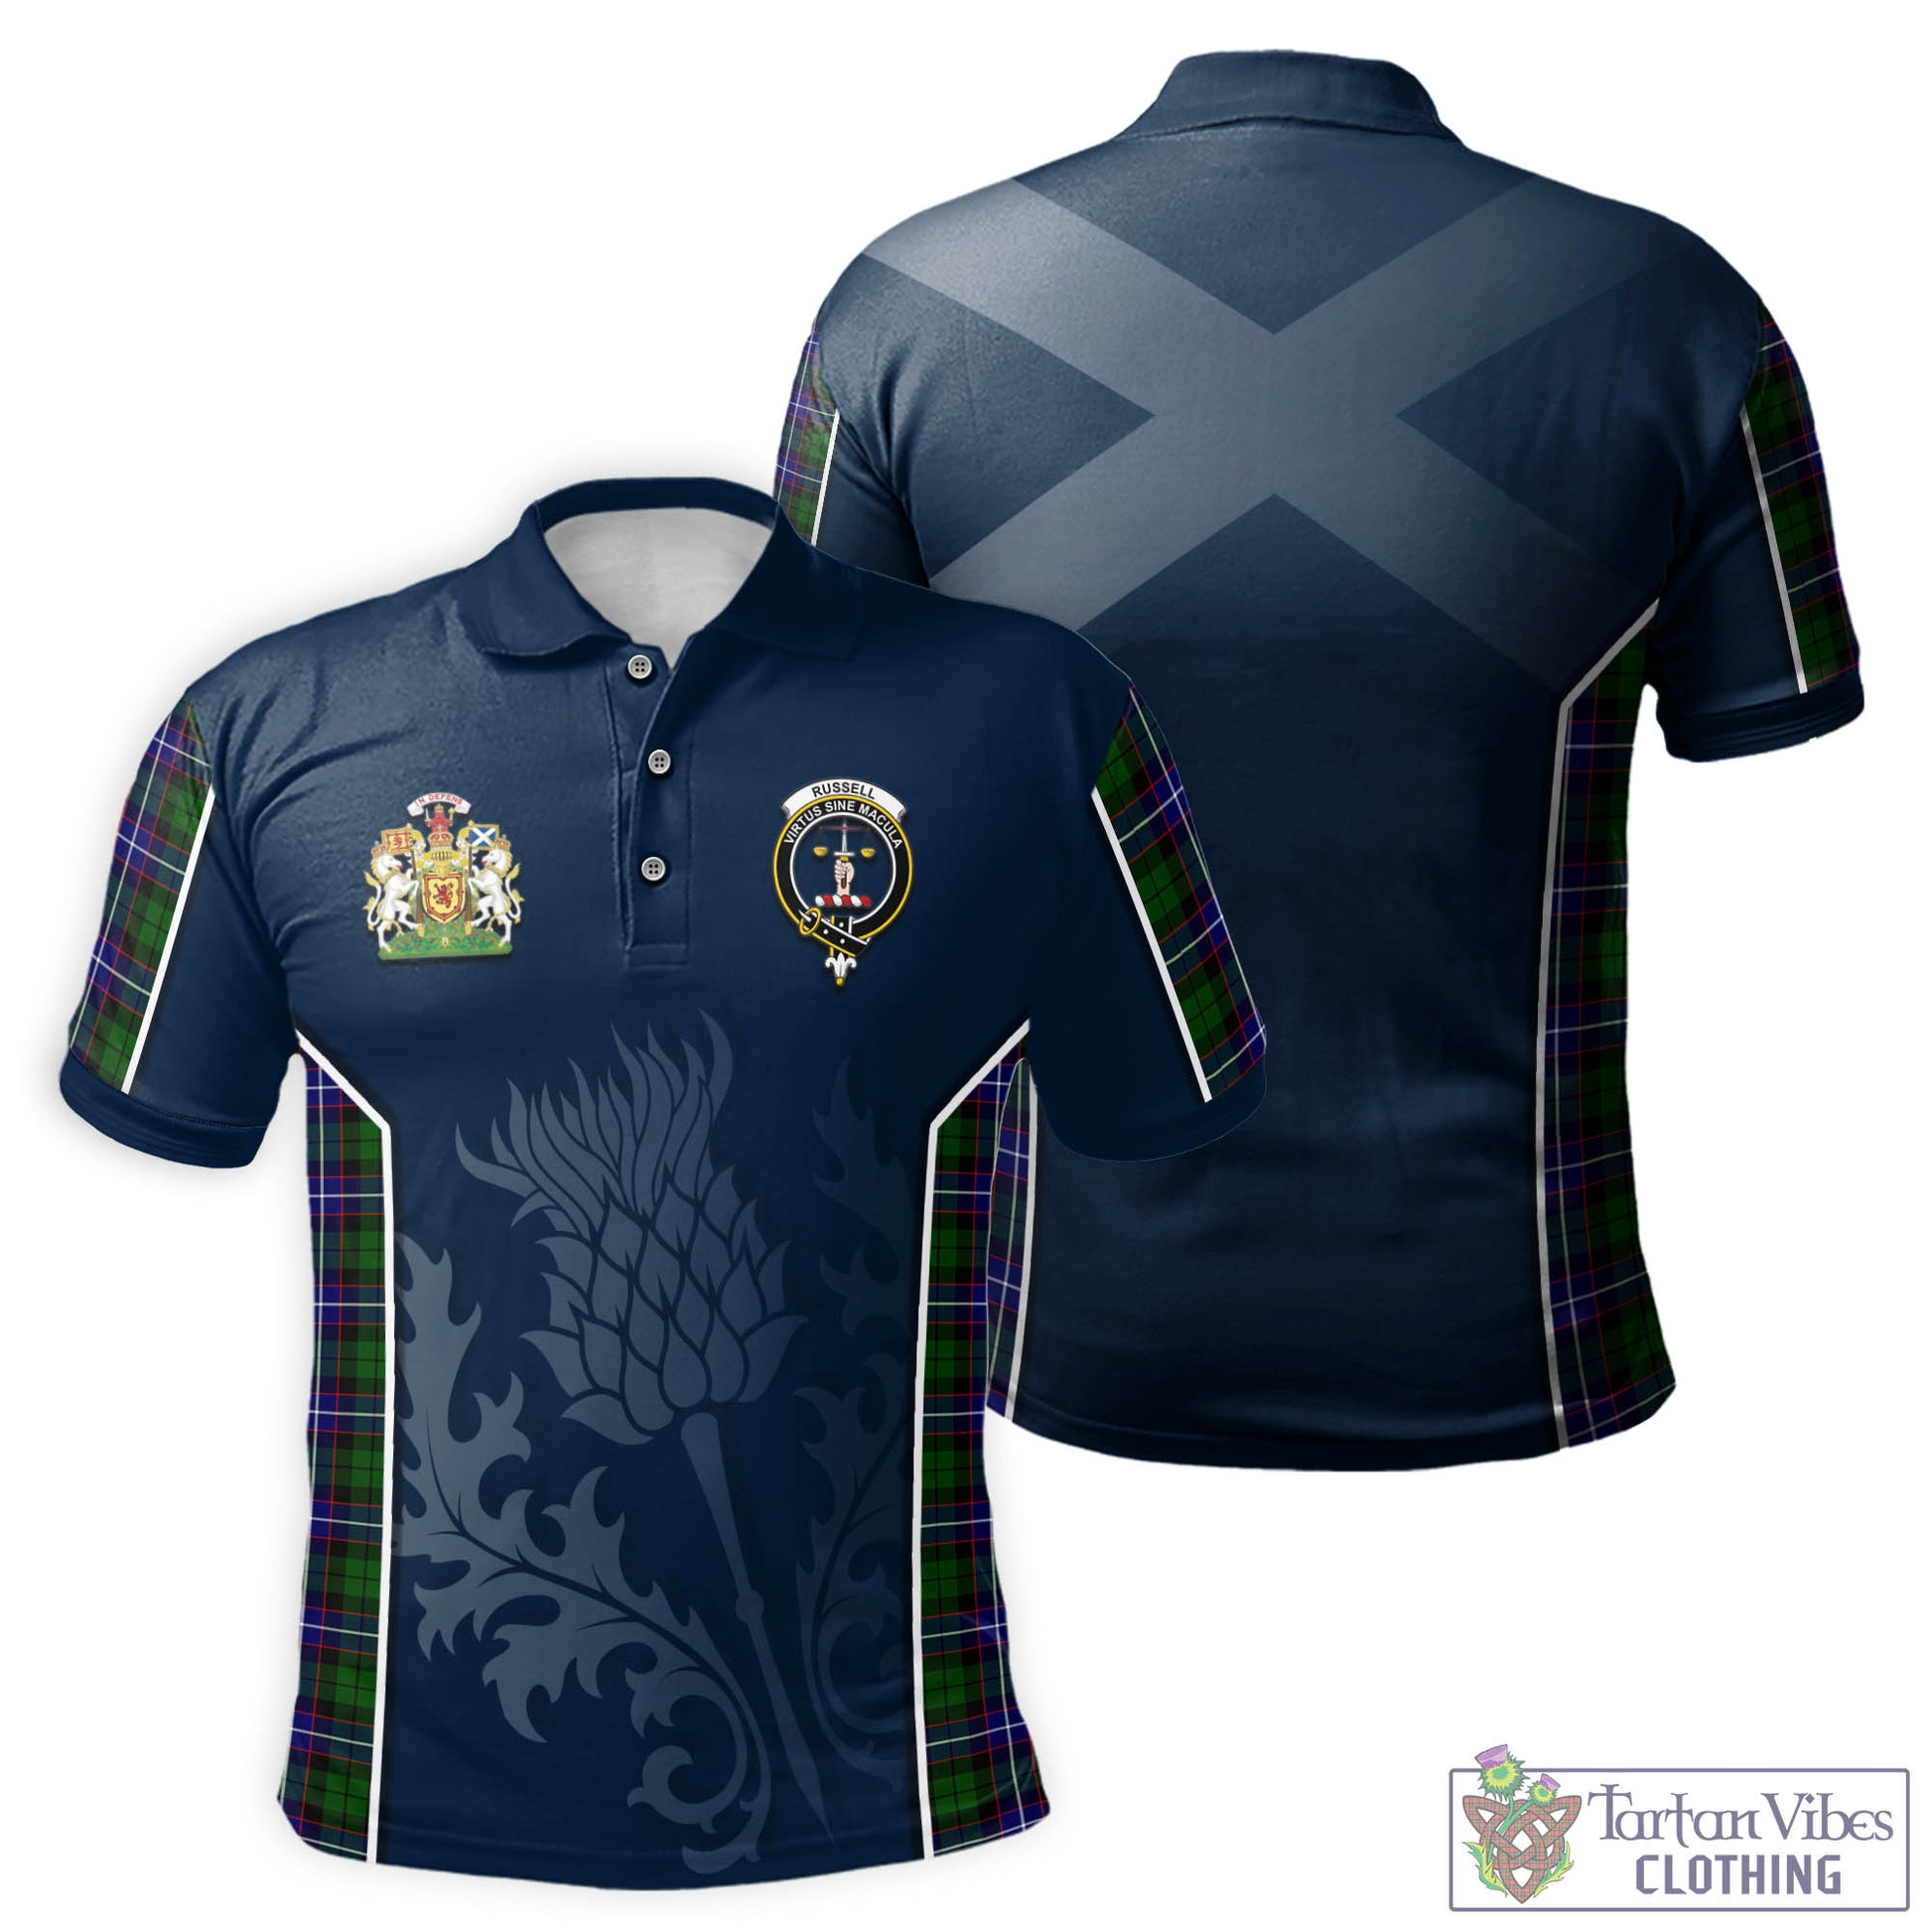 Tartan Vibes Clothing Russell Modern Tartan Men's Polo Shirt with Family Crest and Scottish Thistle Vibes Sport Style